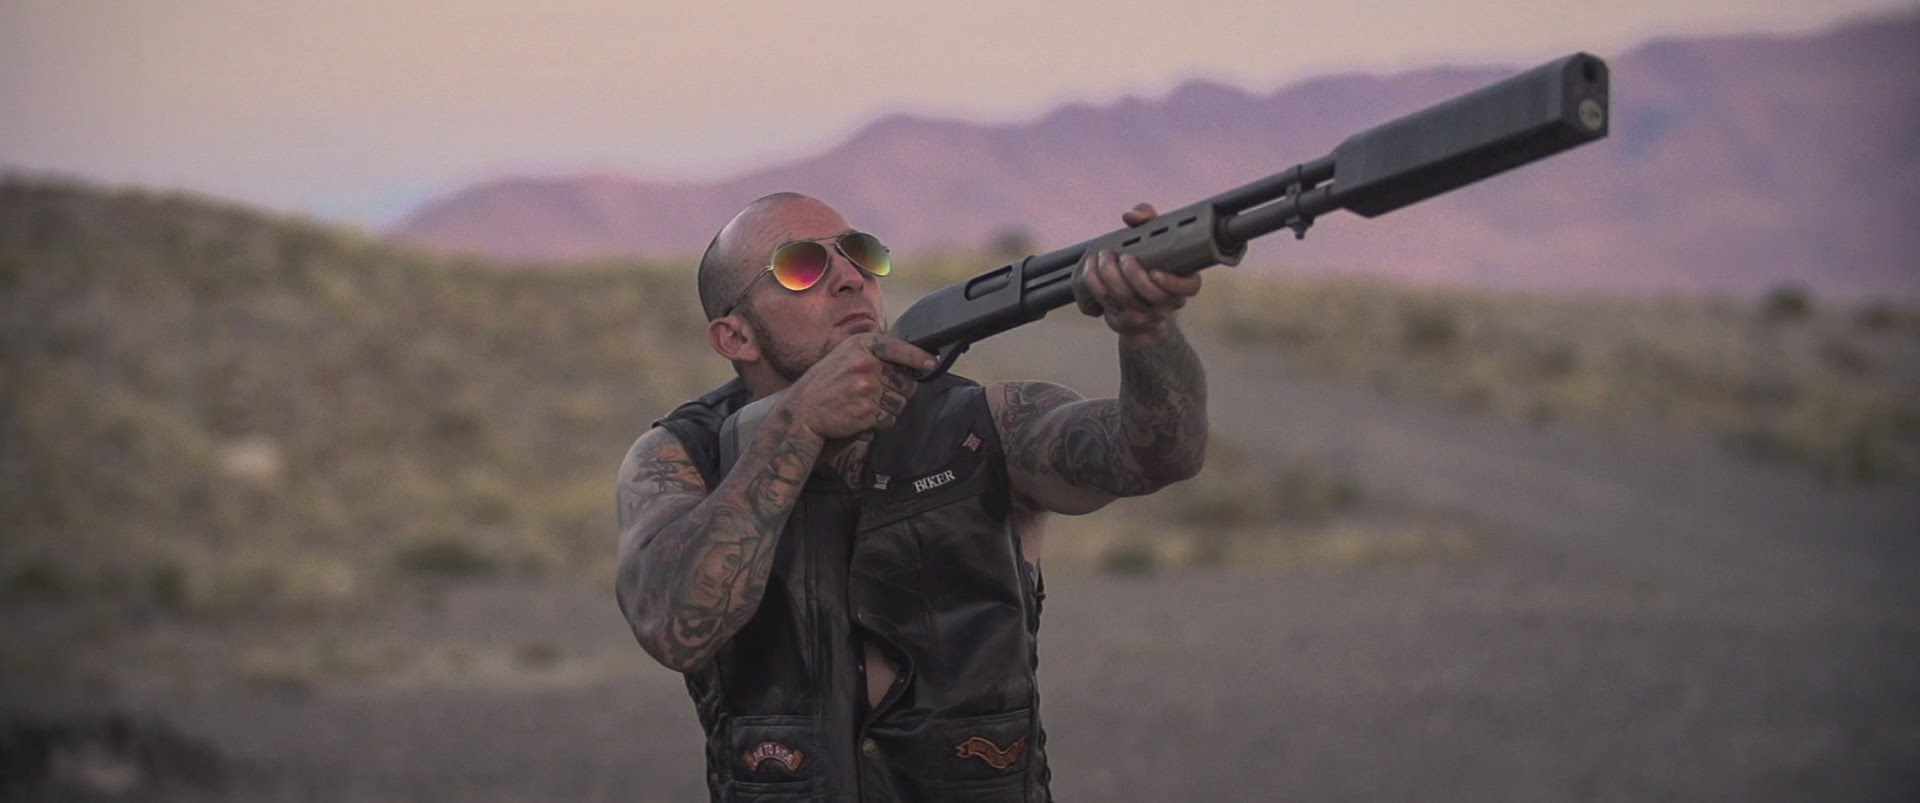 A Company Advertising Gun Silencers by Shooting Drones